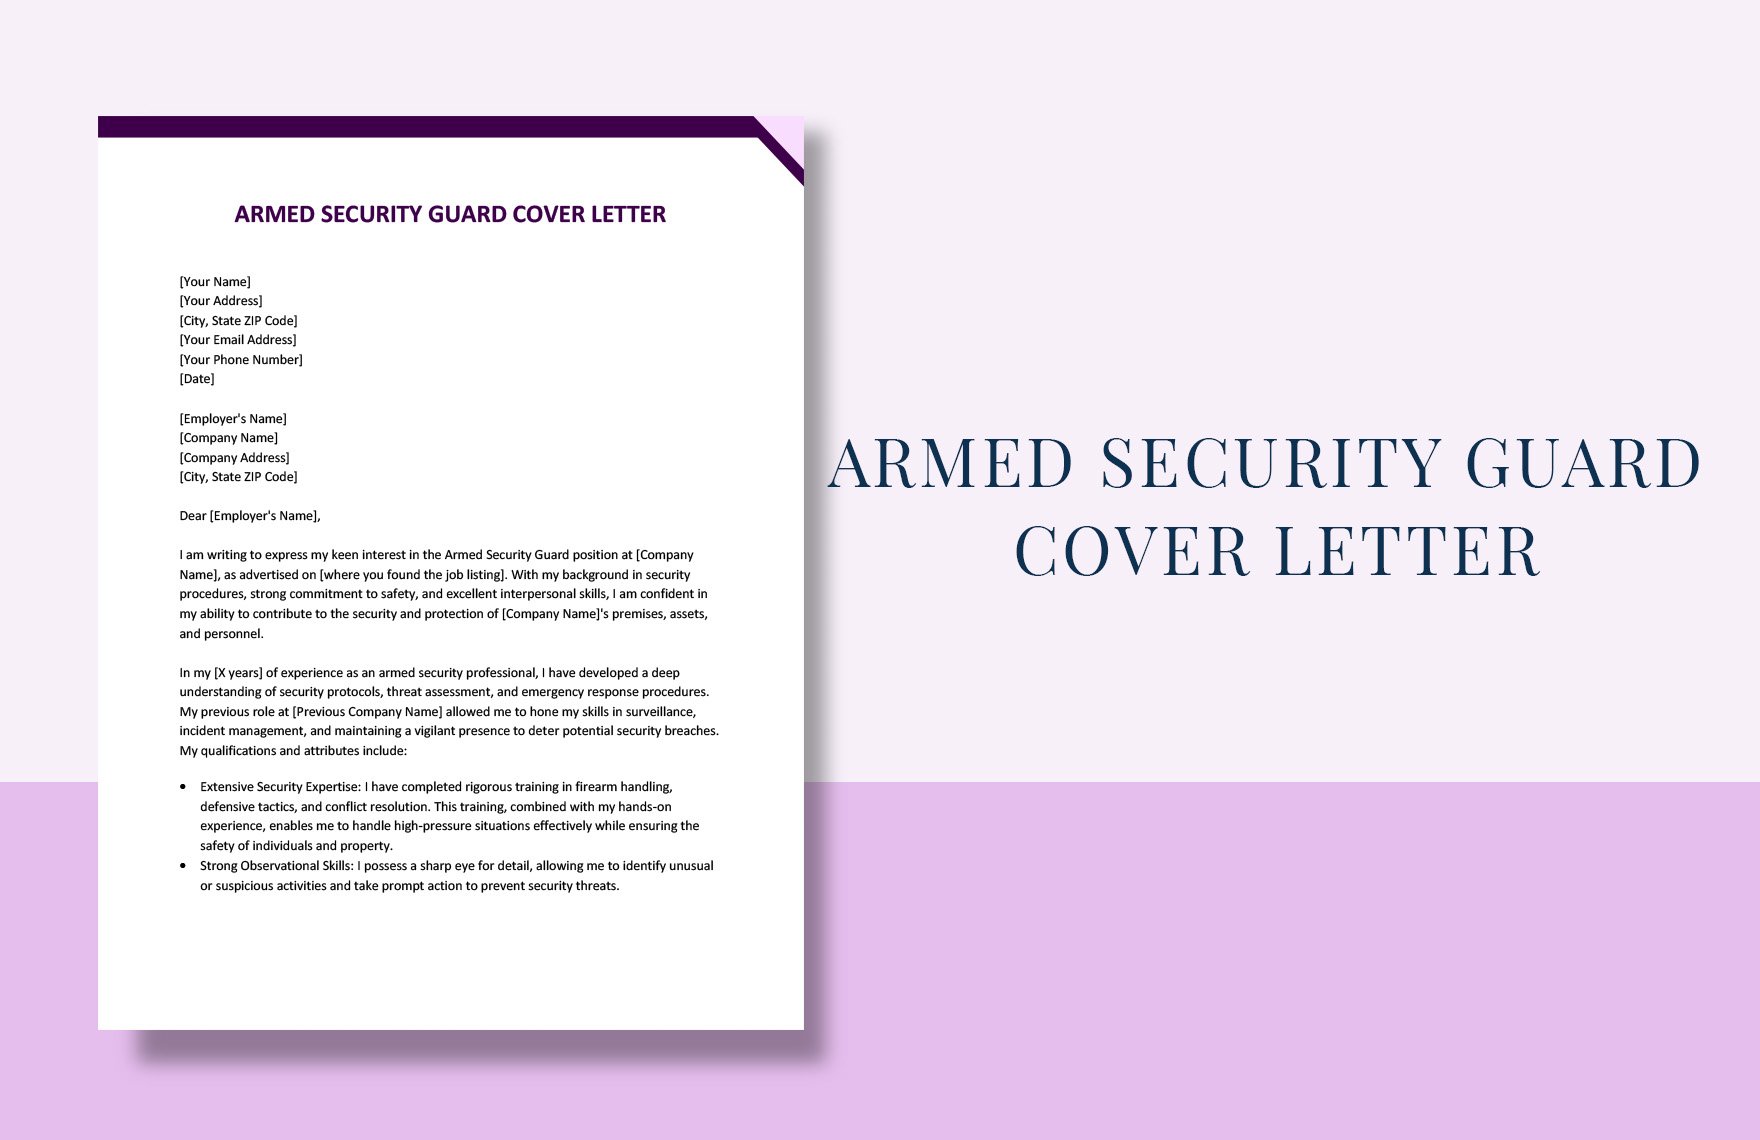 Armed Security Guard Cover Letter in Word, Google Docs